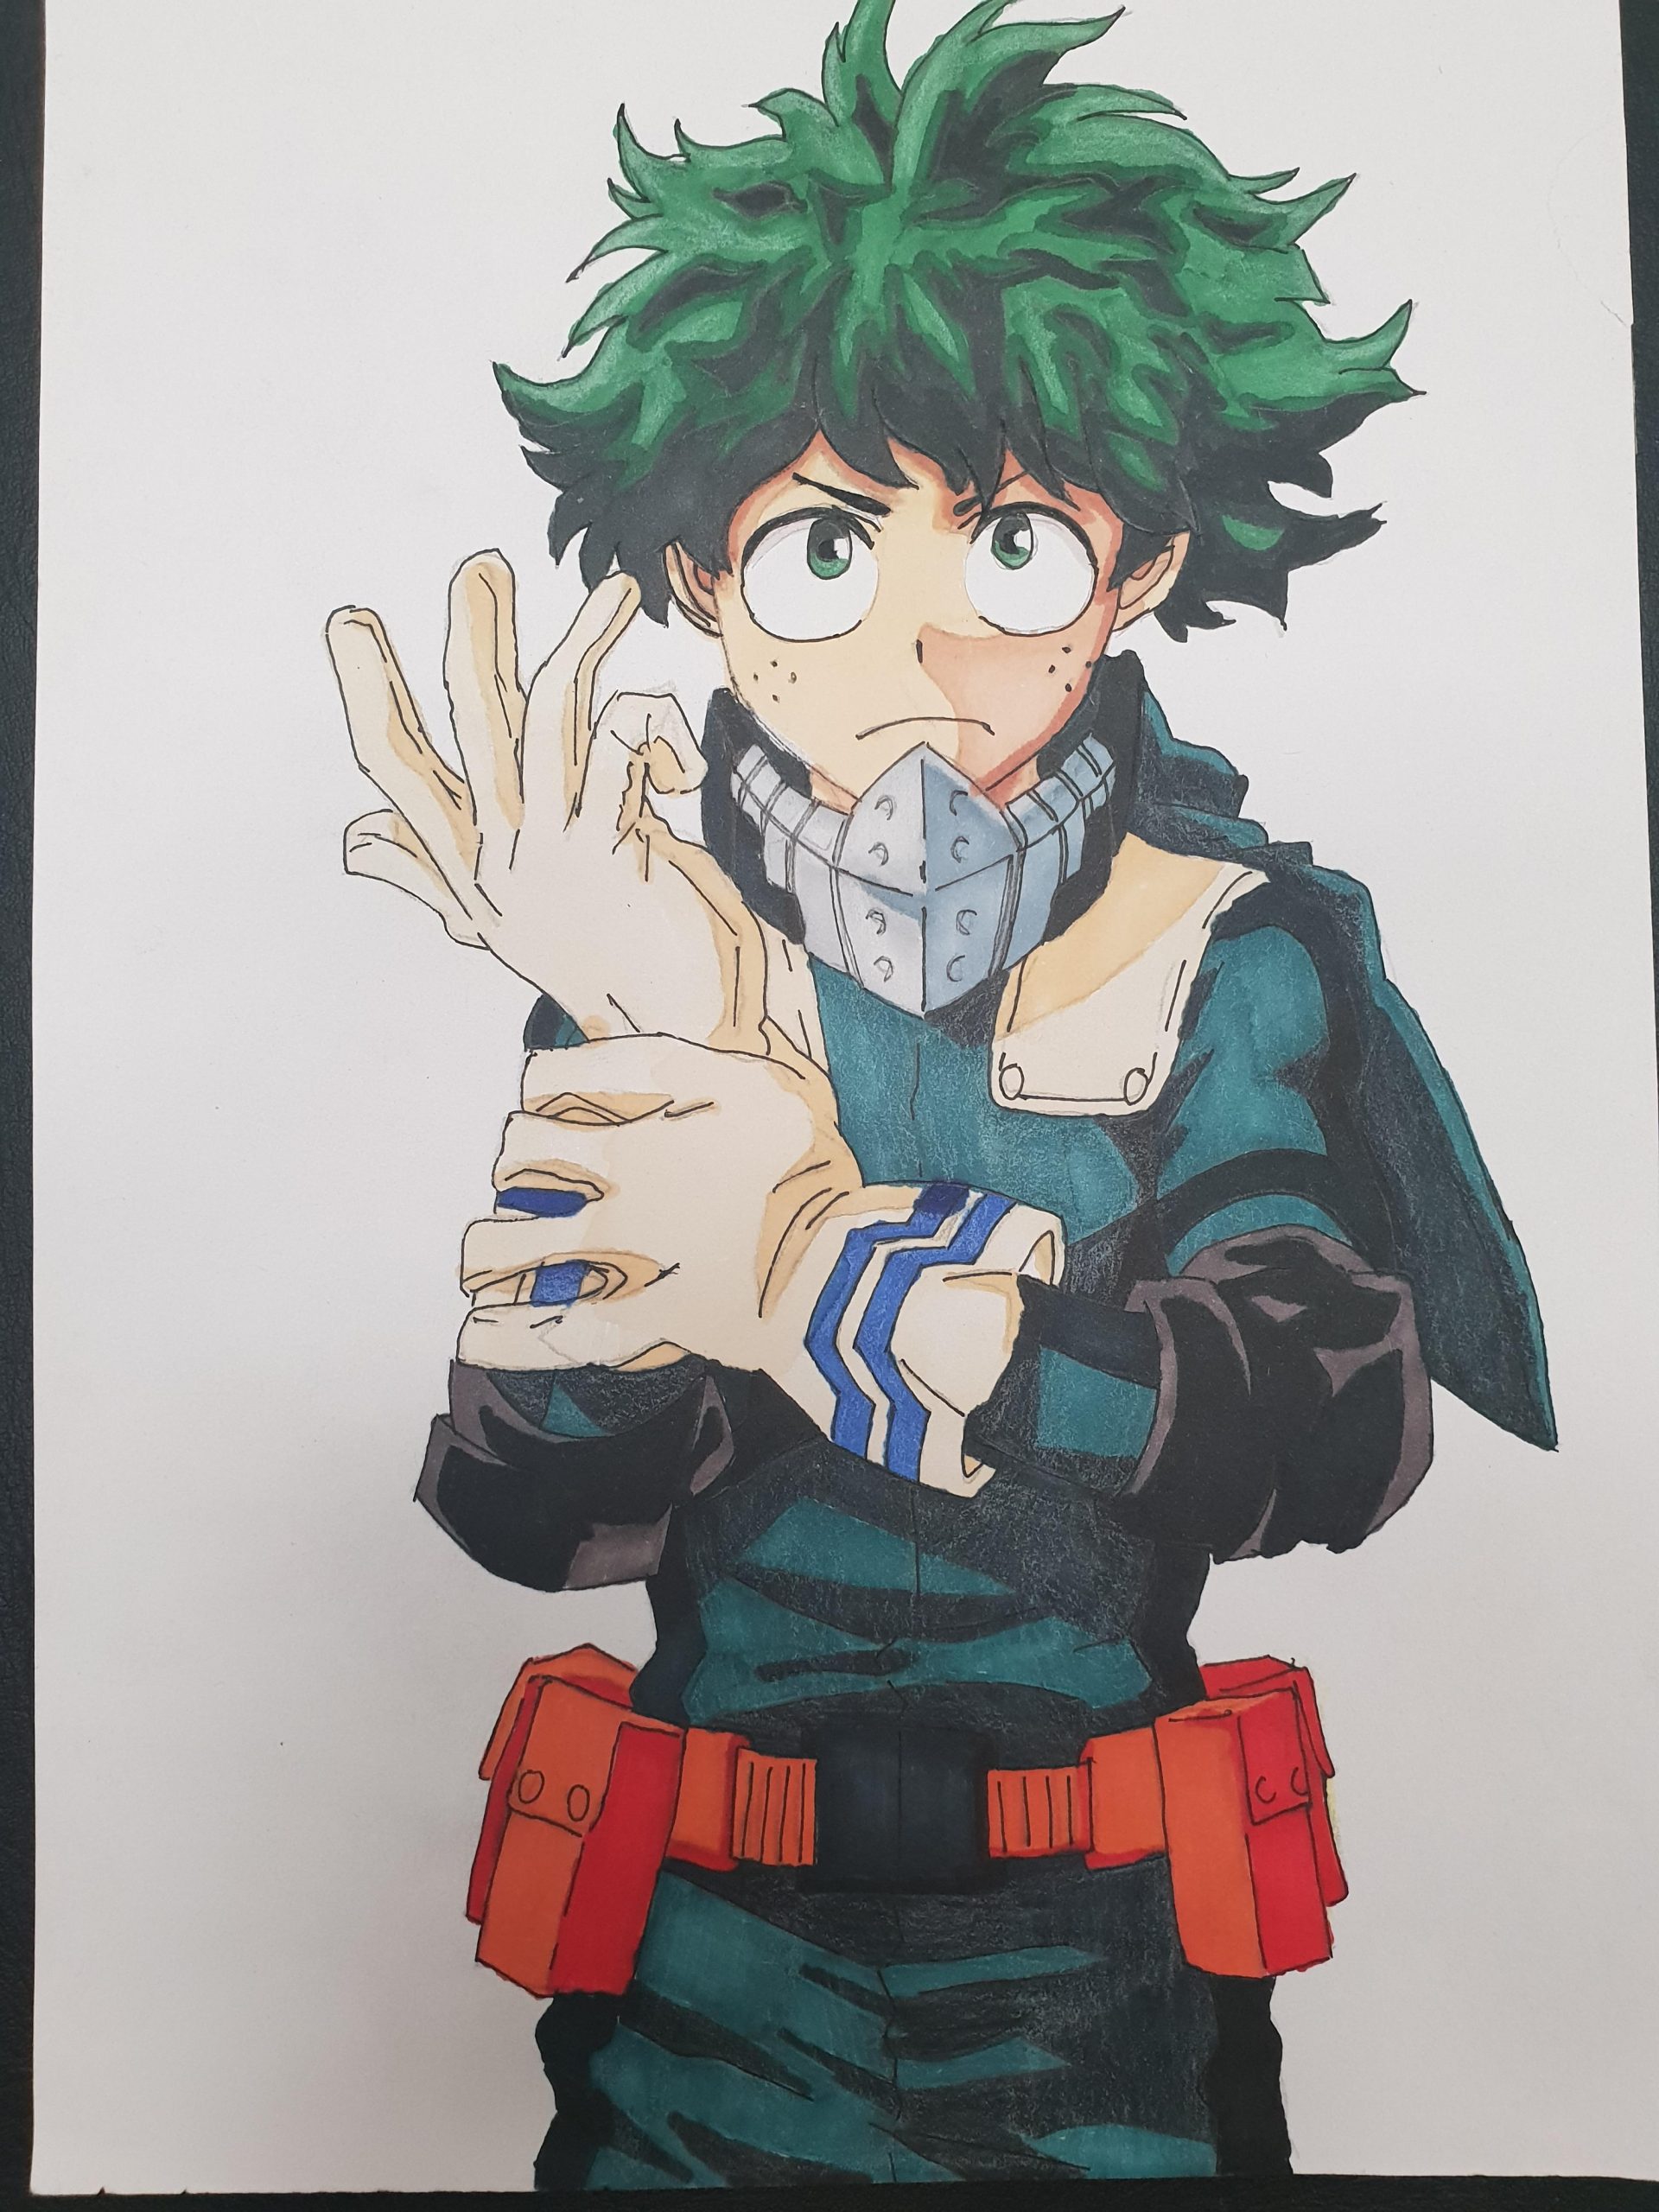 Ive wanted to draw Deku for a while